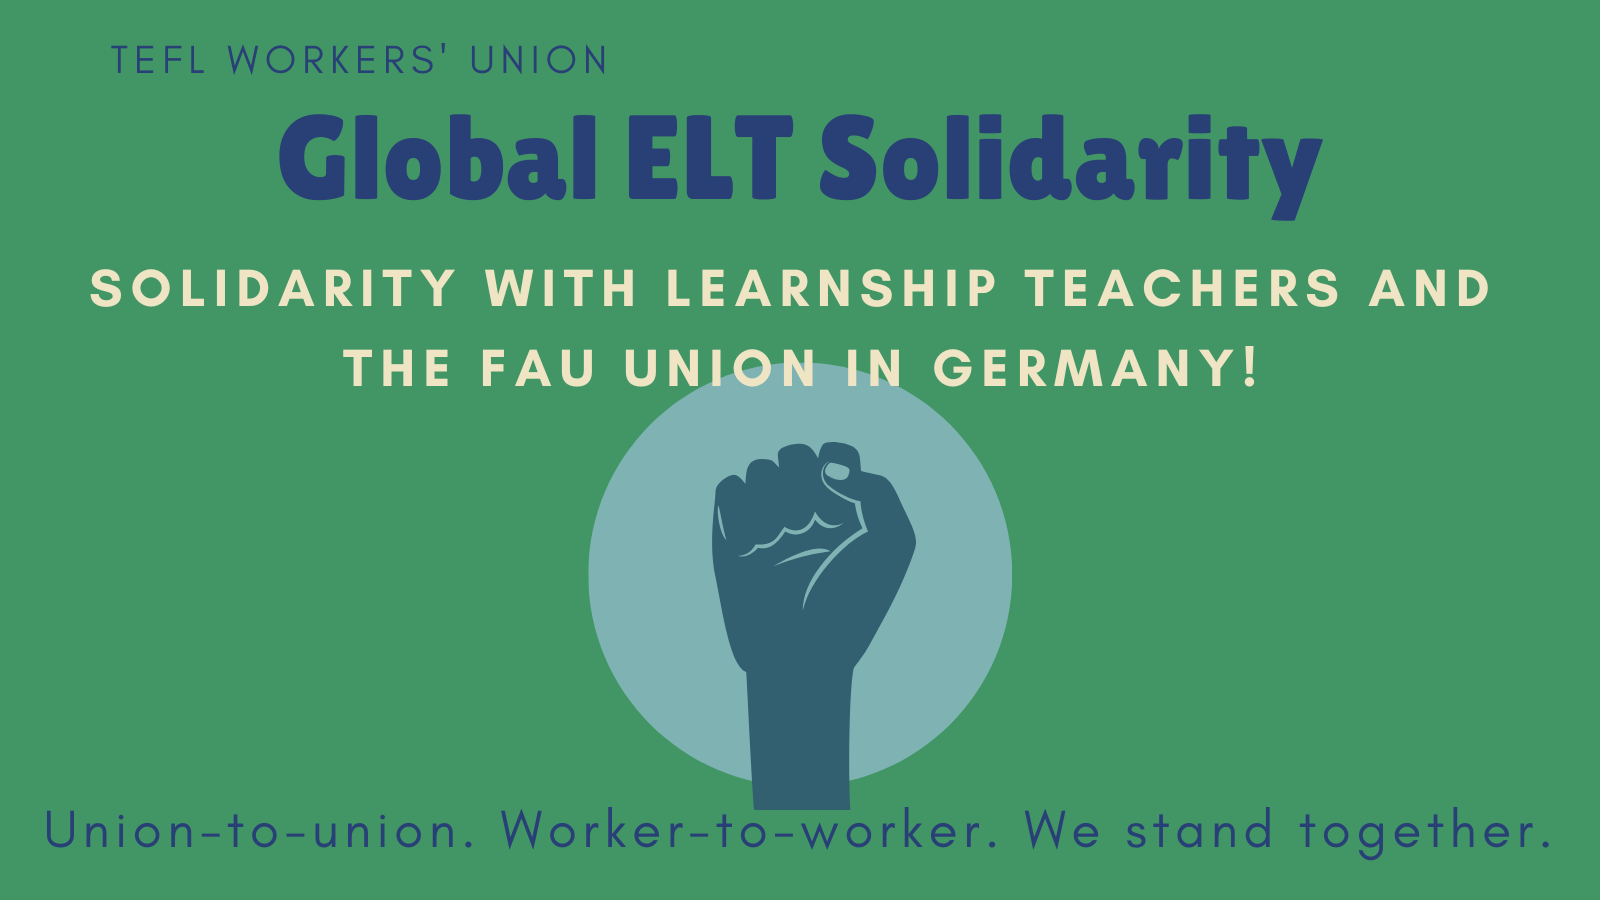 Image reads: Global ELT Solidarity: Solidarity with Learnship teachers and the FAU union in Germany